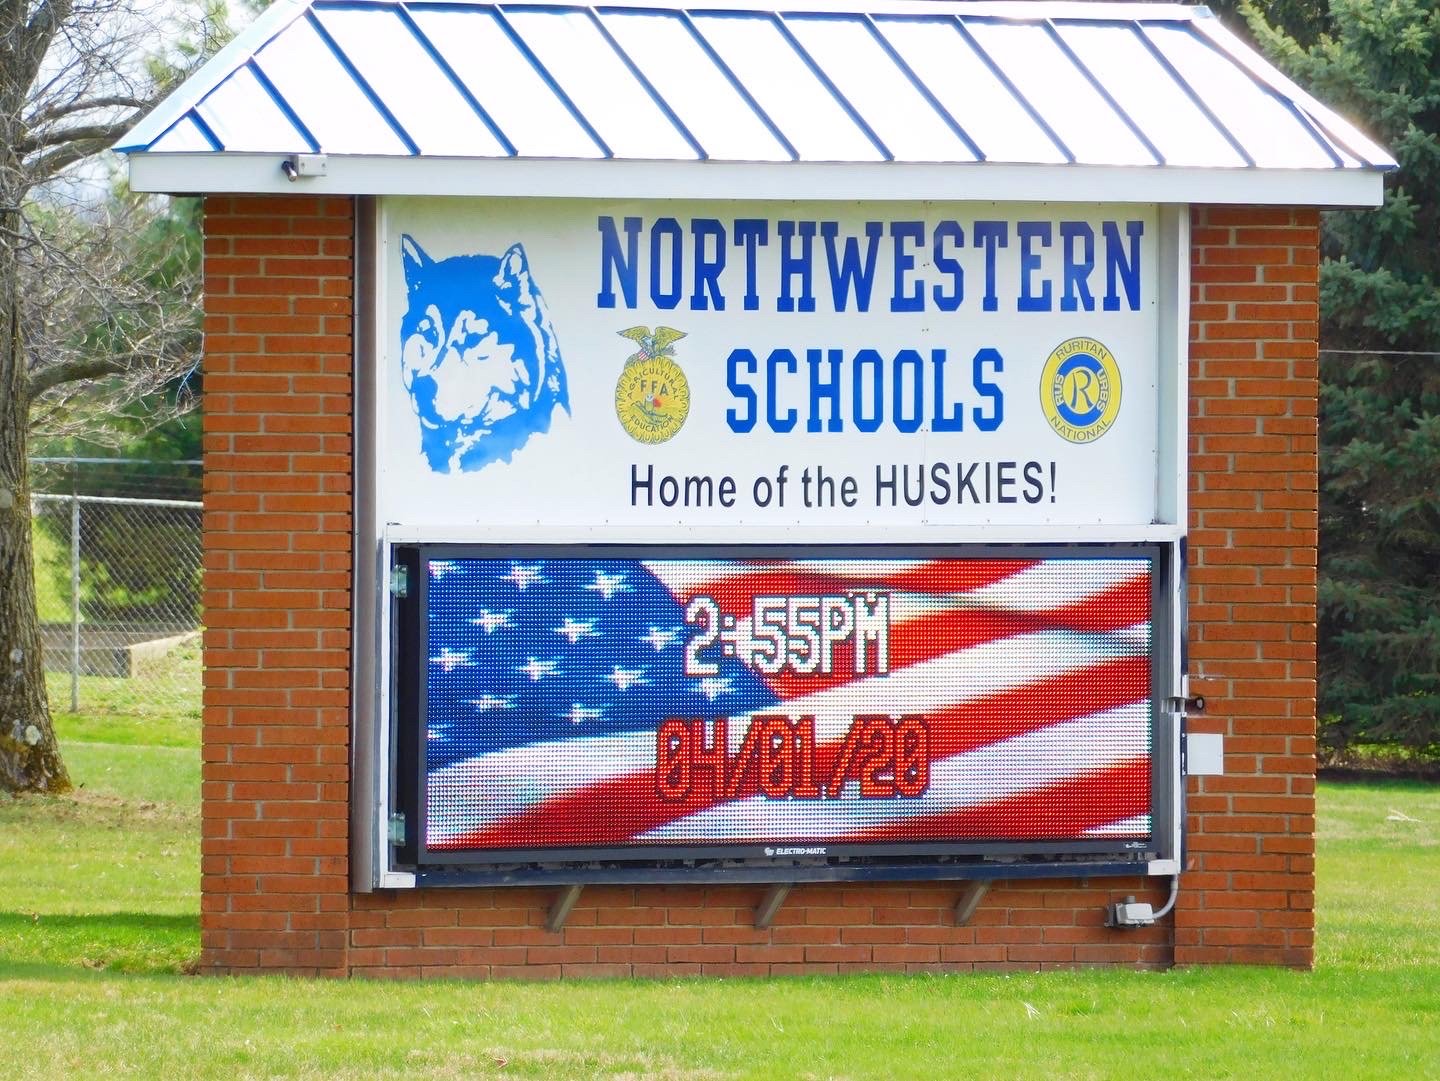 Northwestern Schools Upgrade to LED Fusion Display after Storm Damages